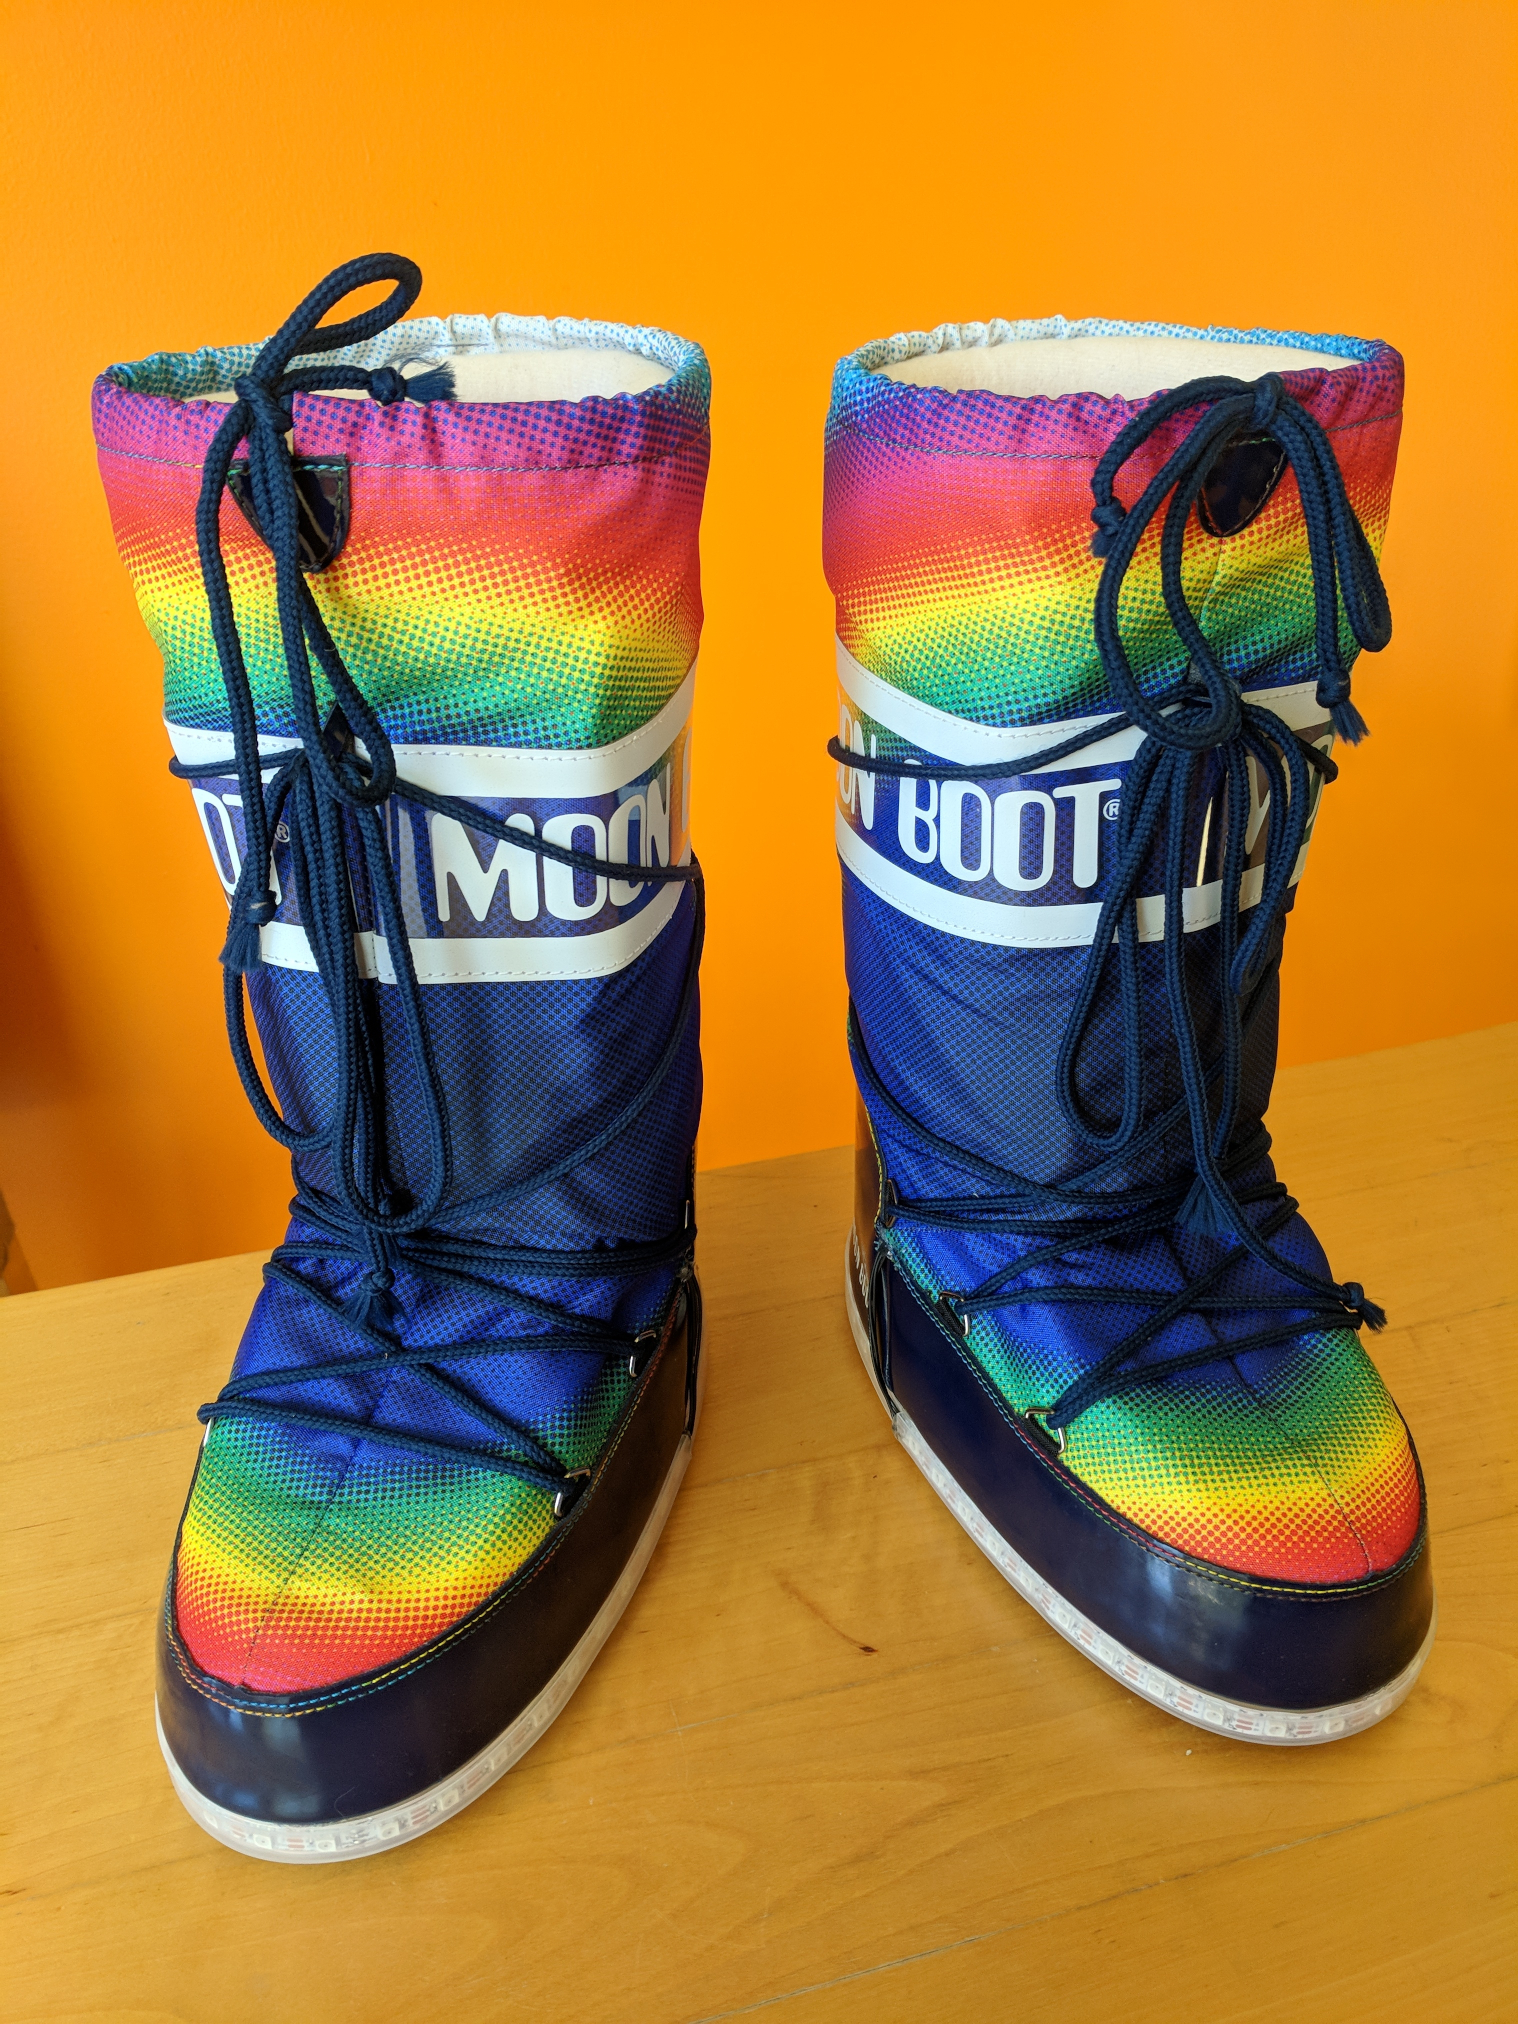 A pair of rainbow moon boots with LED strips around the edge of the soles.